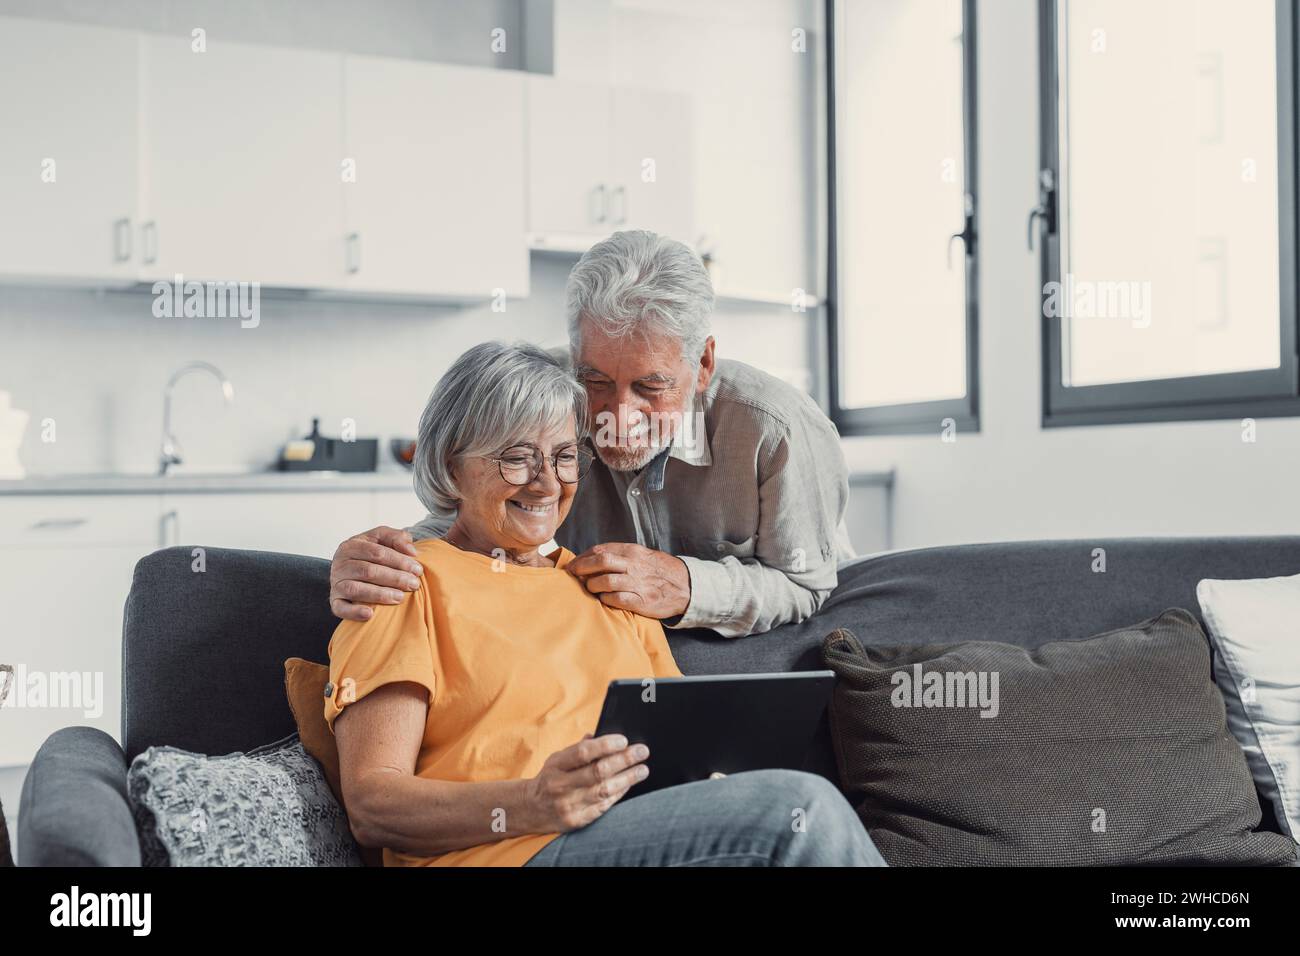 Happy older couple using computer tablet together at home, excited mature man and woman looking at mobile device screen, shopping or chatting online, sitting on cozy couch in living room Stock Photo